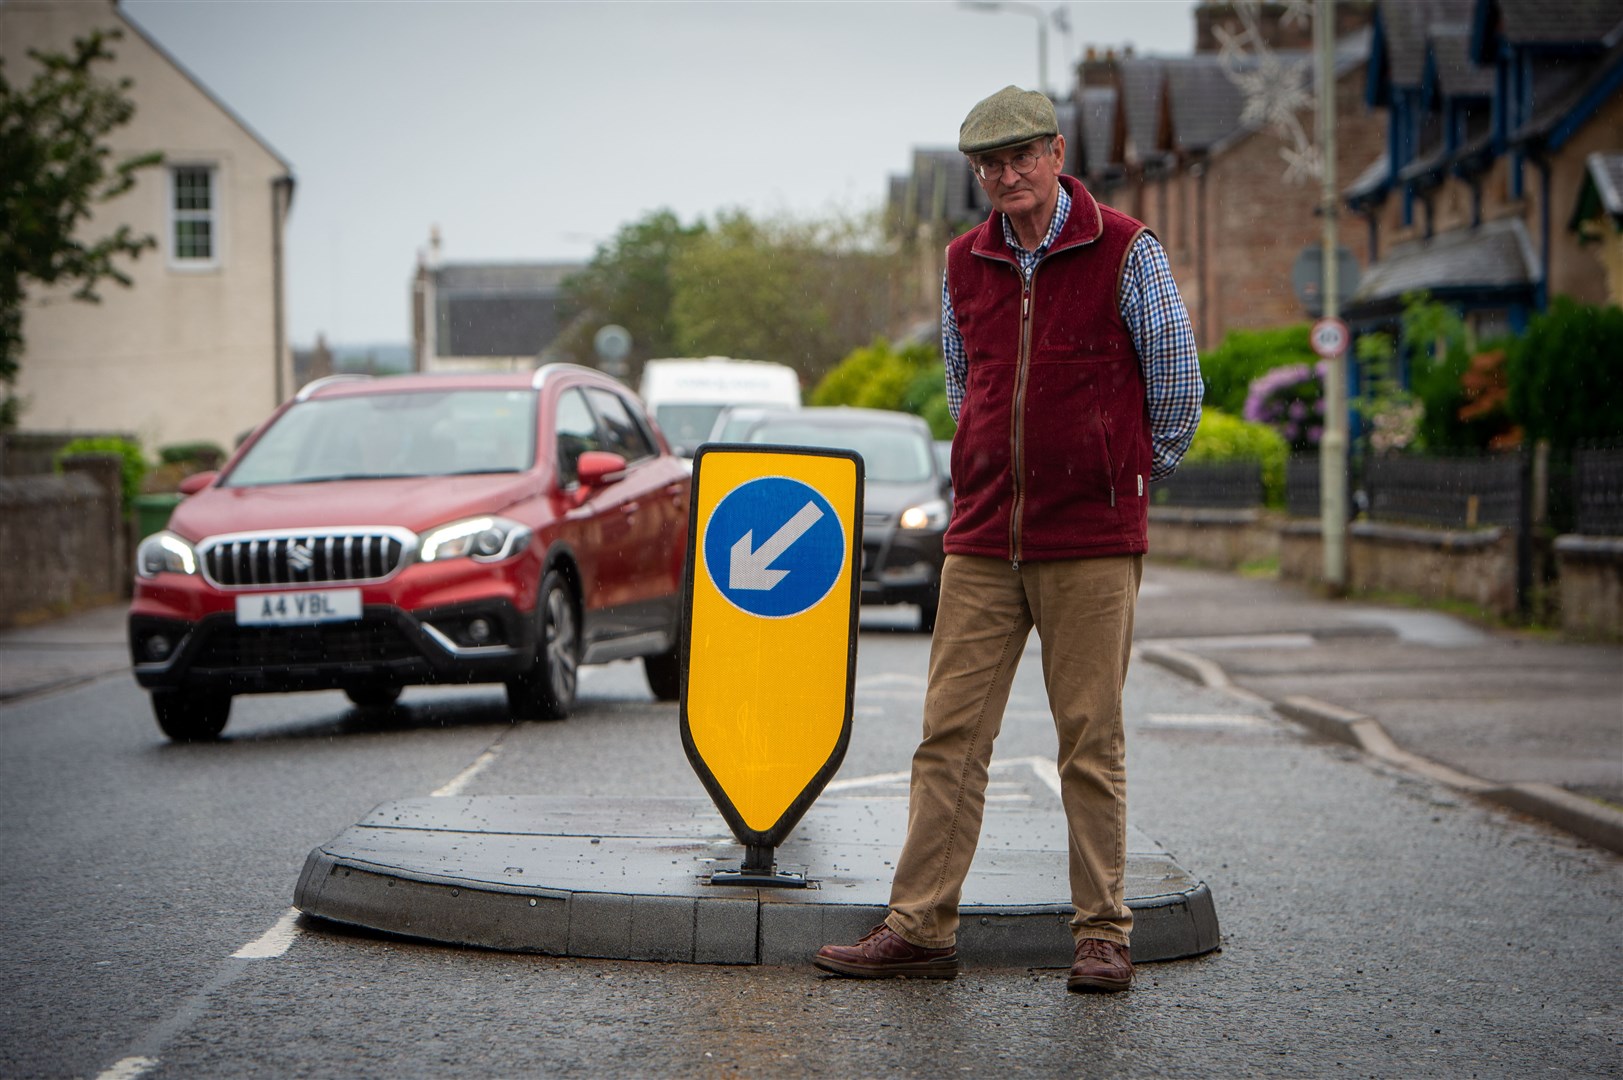 David Lockett at a traffic island outside the police station Dingwall. As well as pushing for action on a new link road to ease congestion and open up development, community activists in Dingwall have questions about the efficacy of temporary traffic calming measures. Picture: Callum Mackay